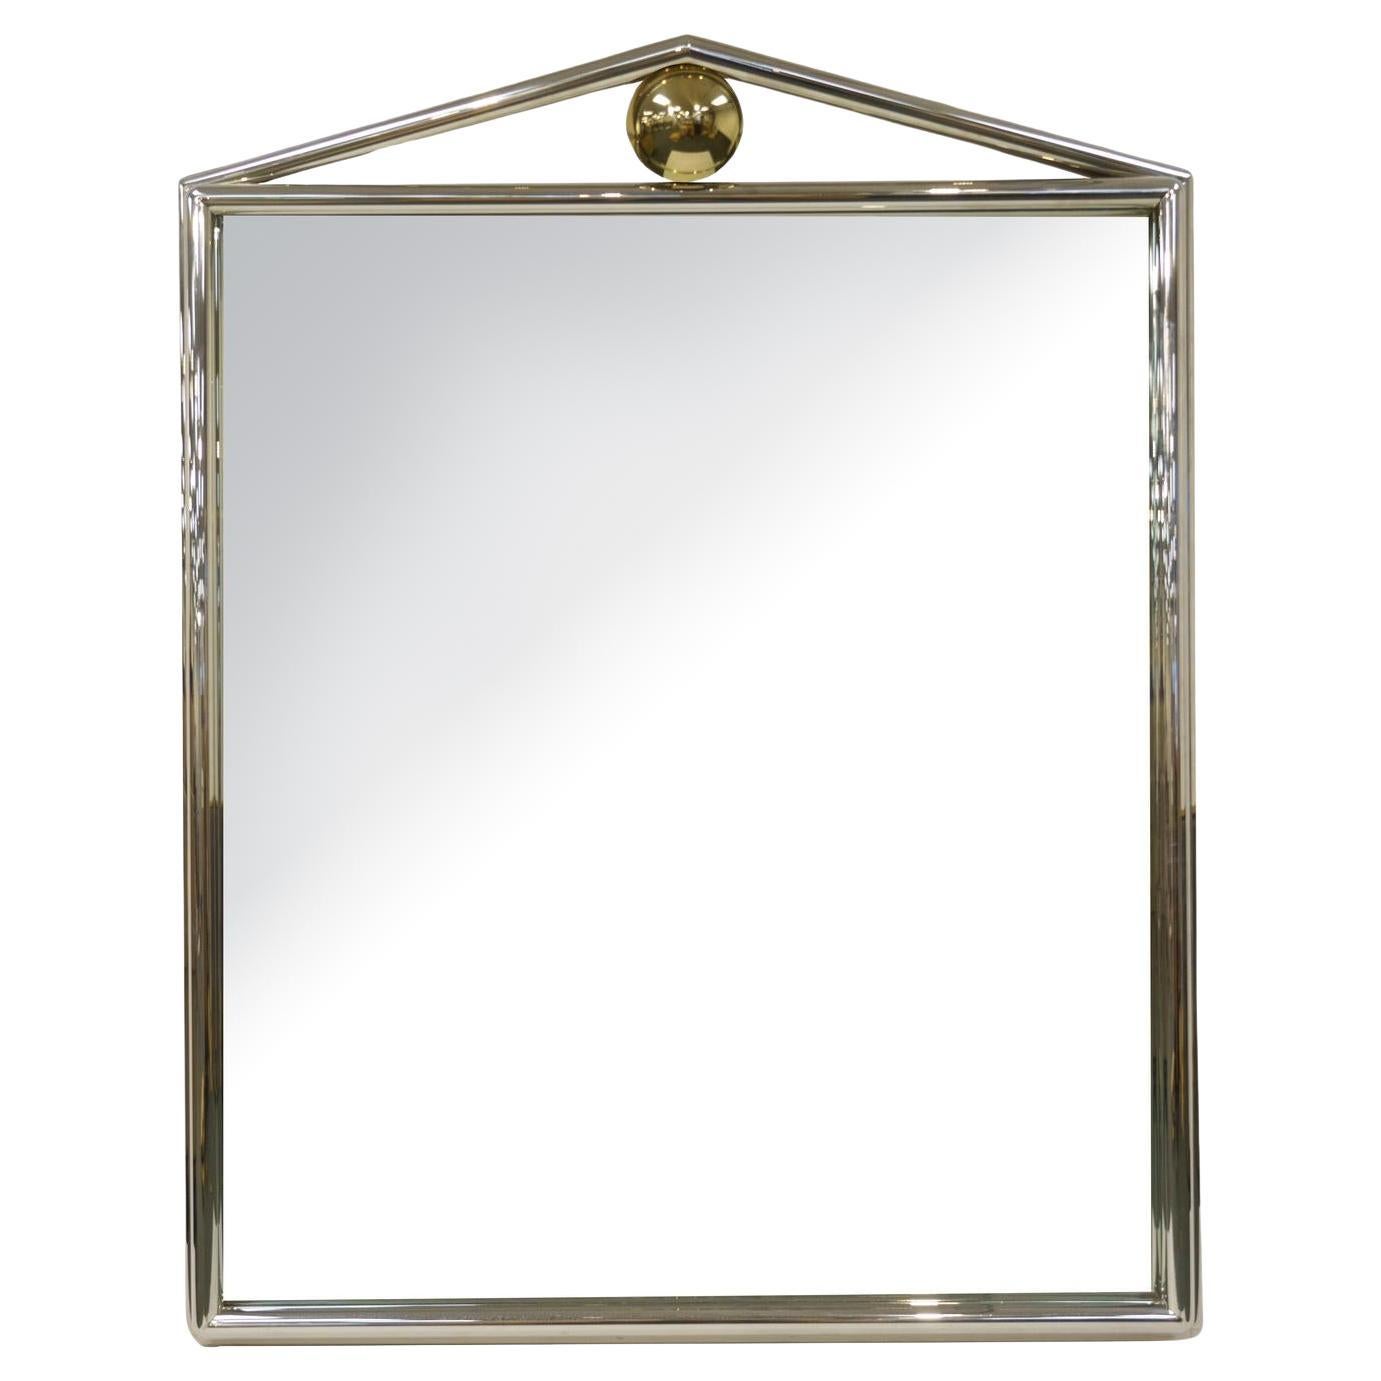 Exceptional Mid Century Modern Chrome Framed / Brass Decorated Mantel Mirror For Sale